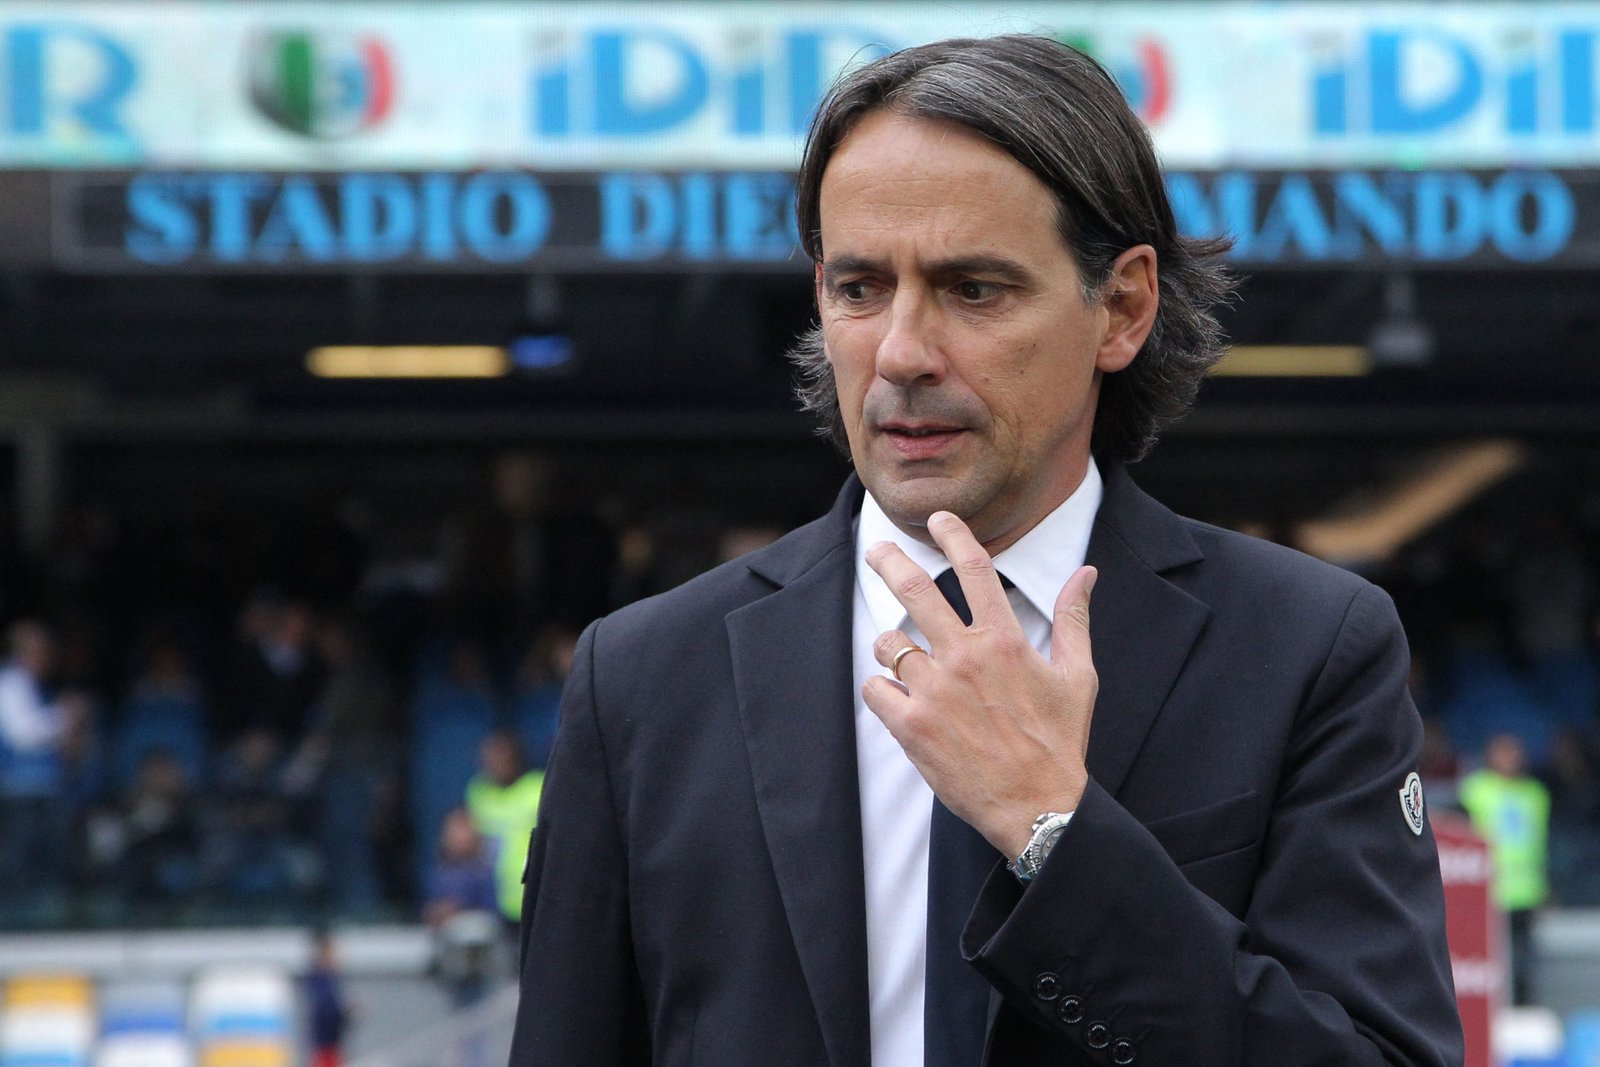 Simone Inzaghi in Napoli-Inter di Serie A (Photo by Carlo Hermann/AFP via Getty Images/One Football)